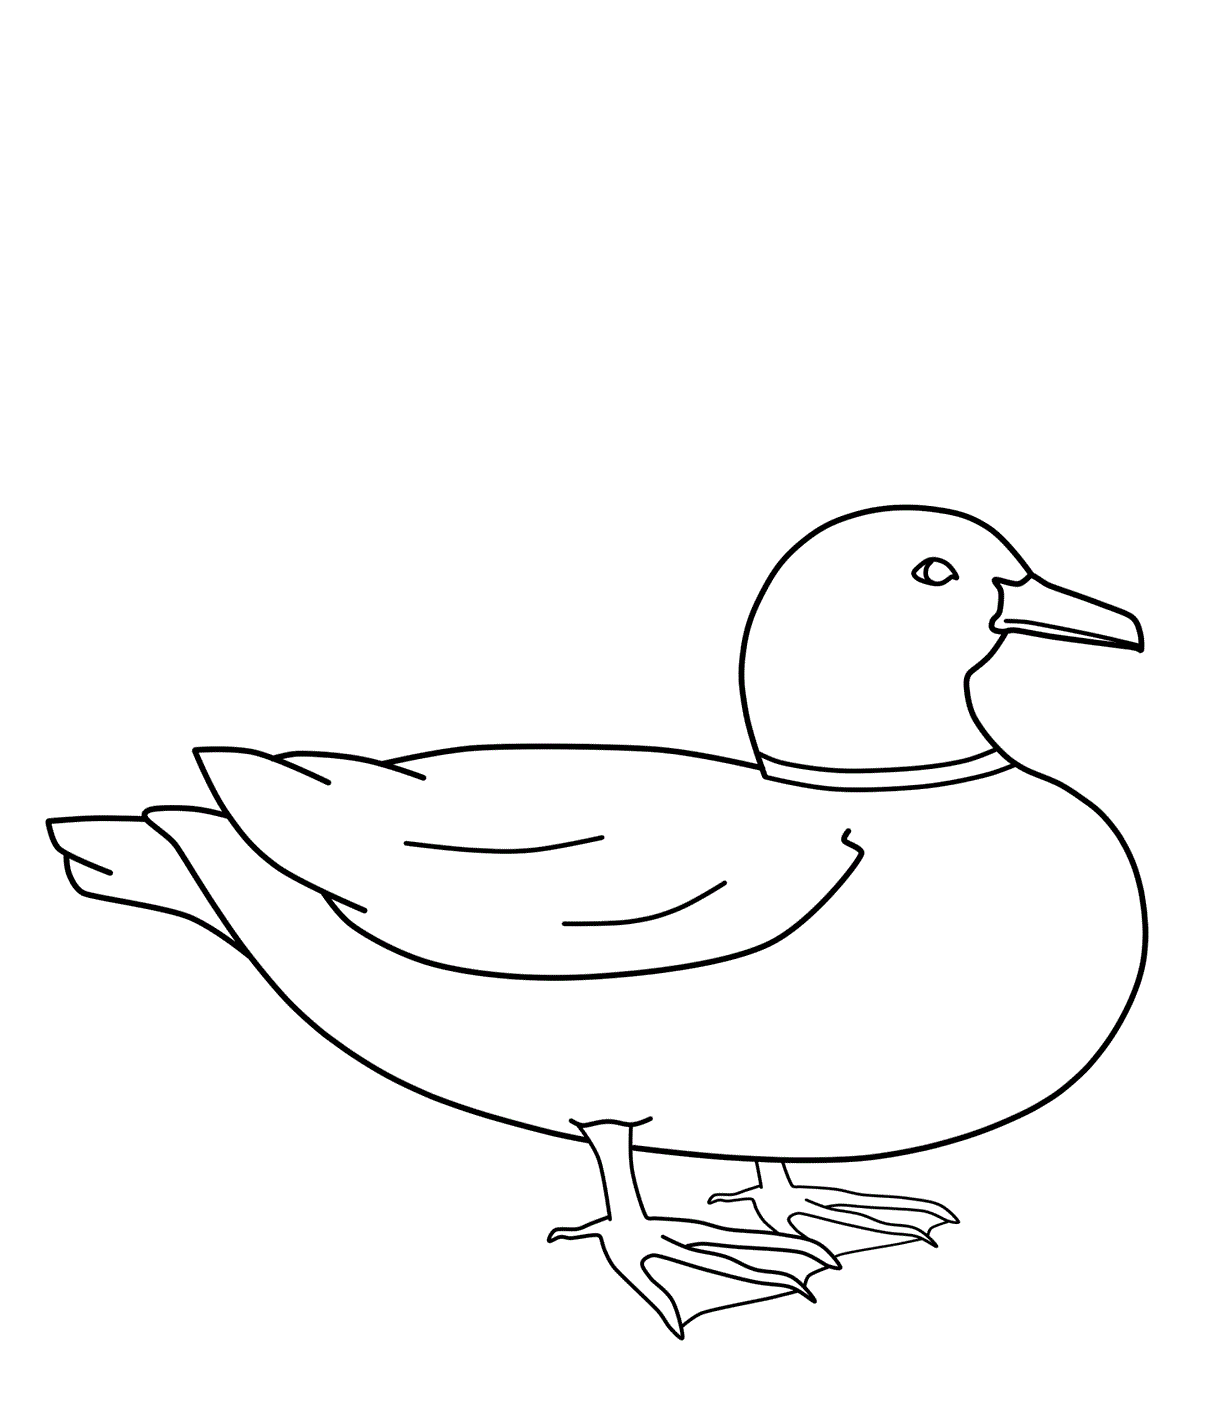 Duck Coloring Pages Best Coloring Pages For Kids